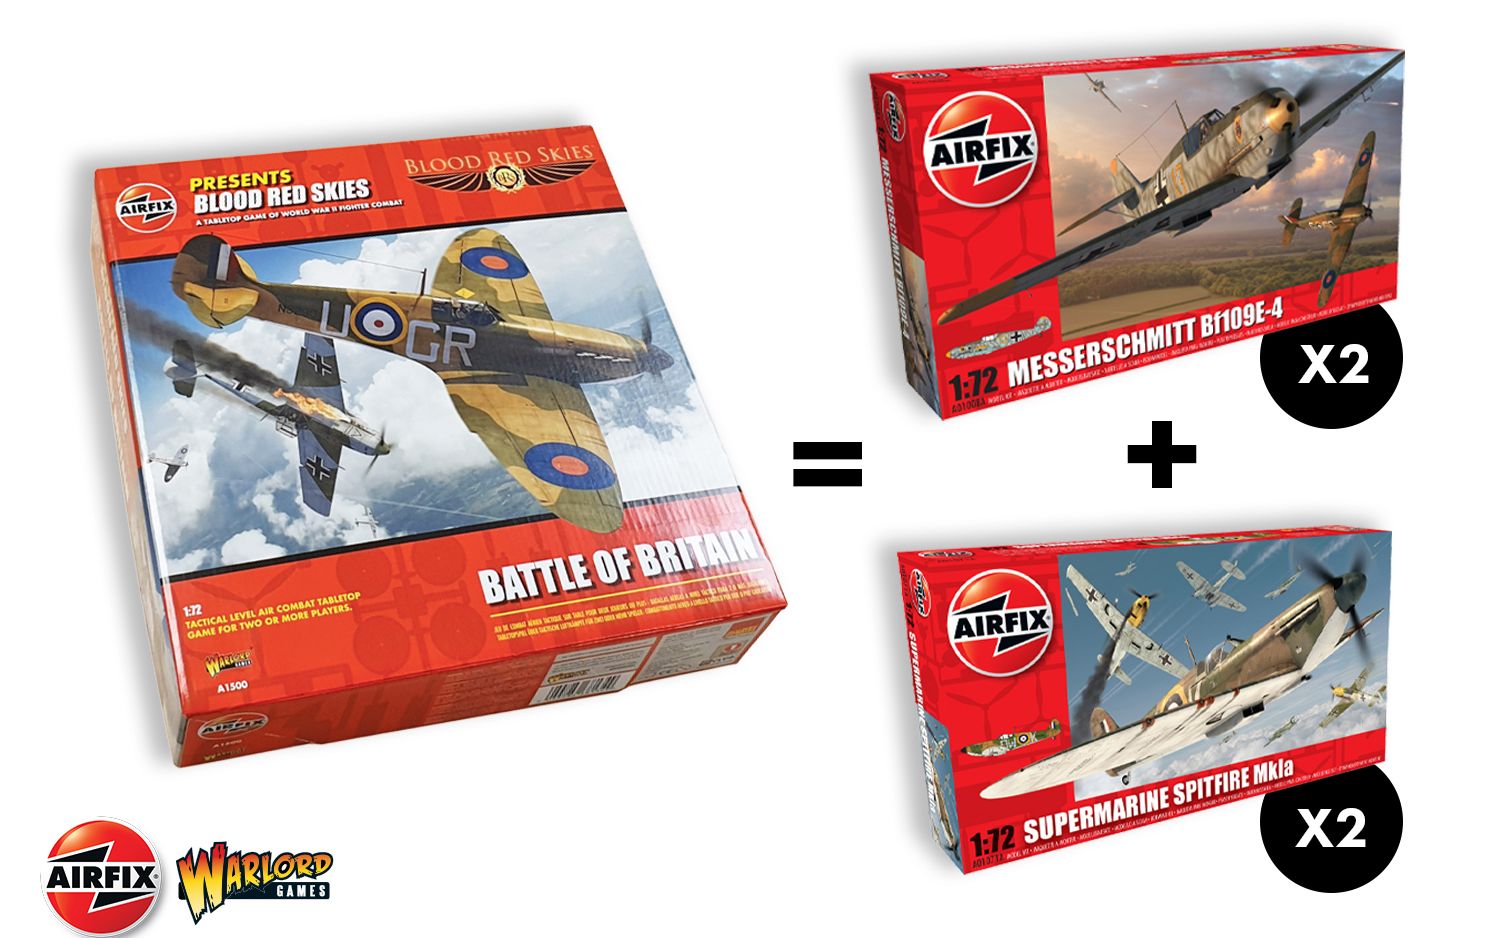 A1500 Airfix Blood Red Skies - Battle of Britain